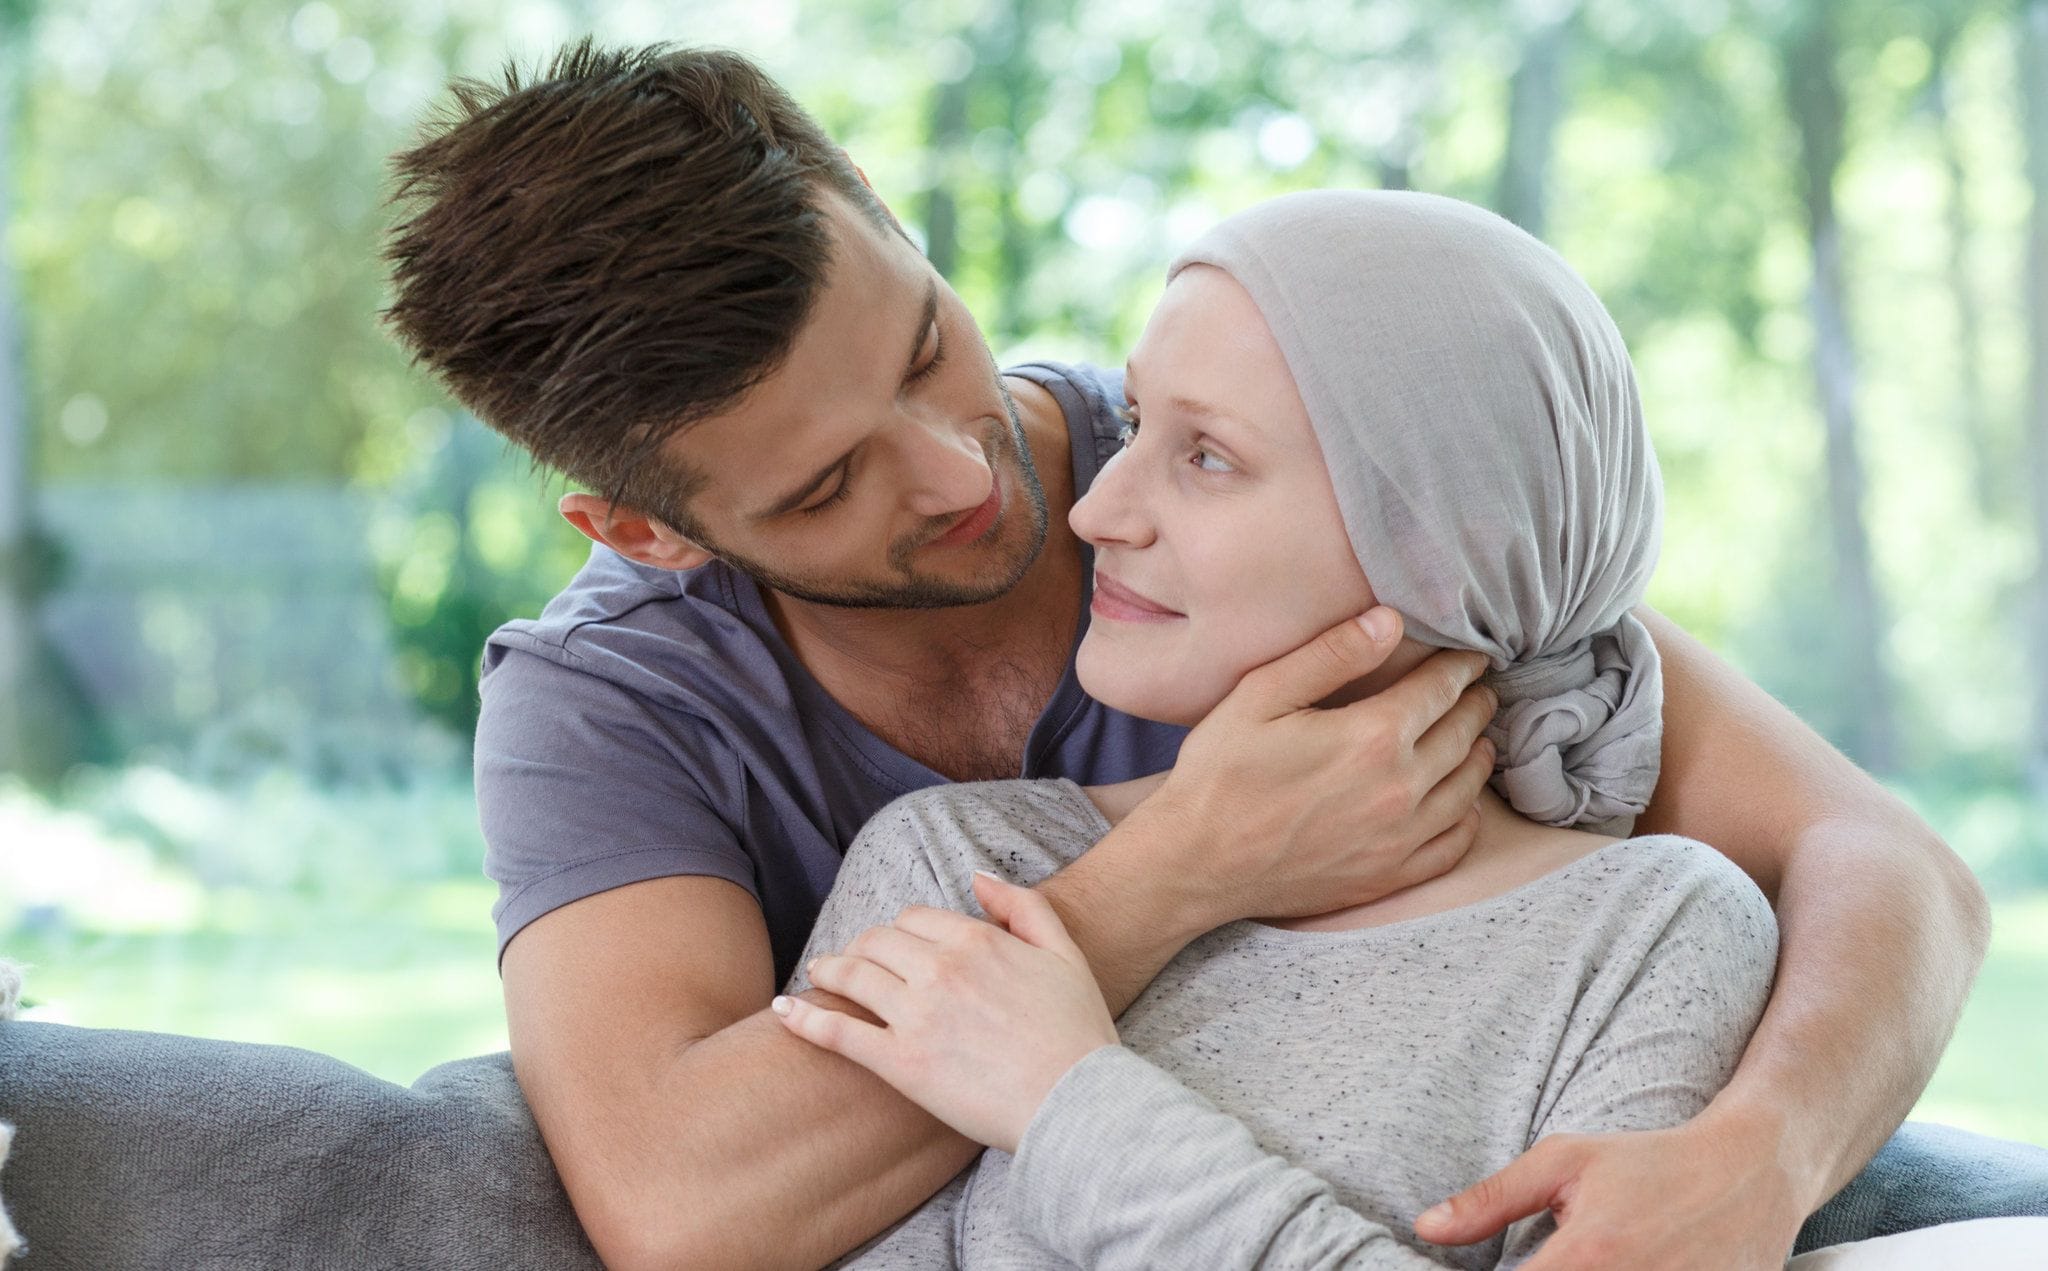 5 Tips for Addressing Sexual Pain and Rebuilding Intimacy After Breast Cancer